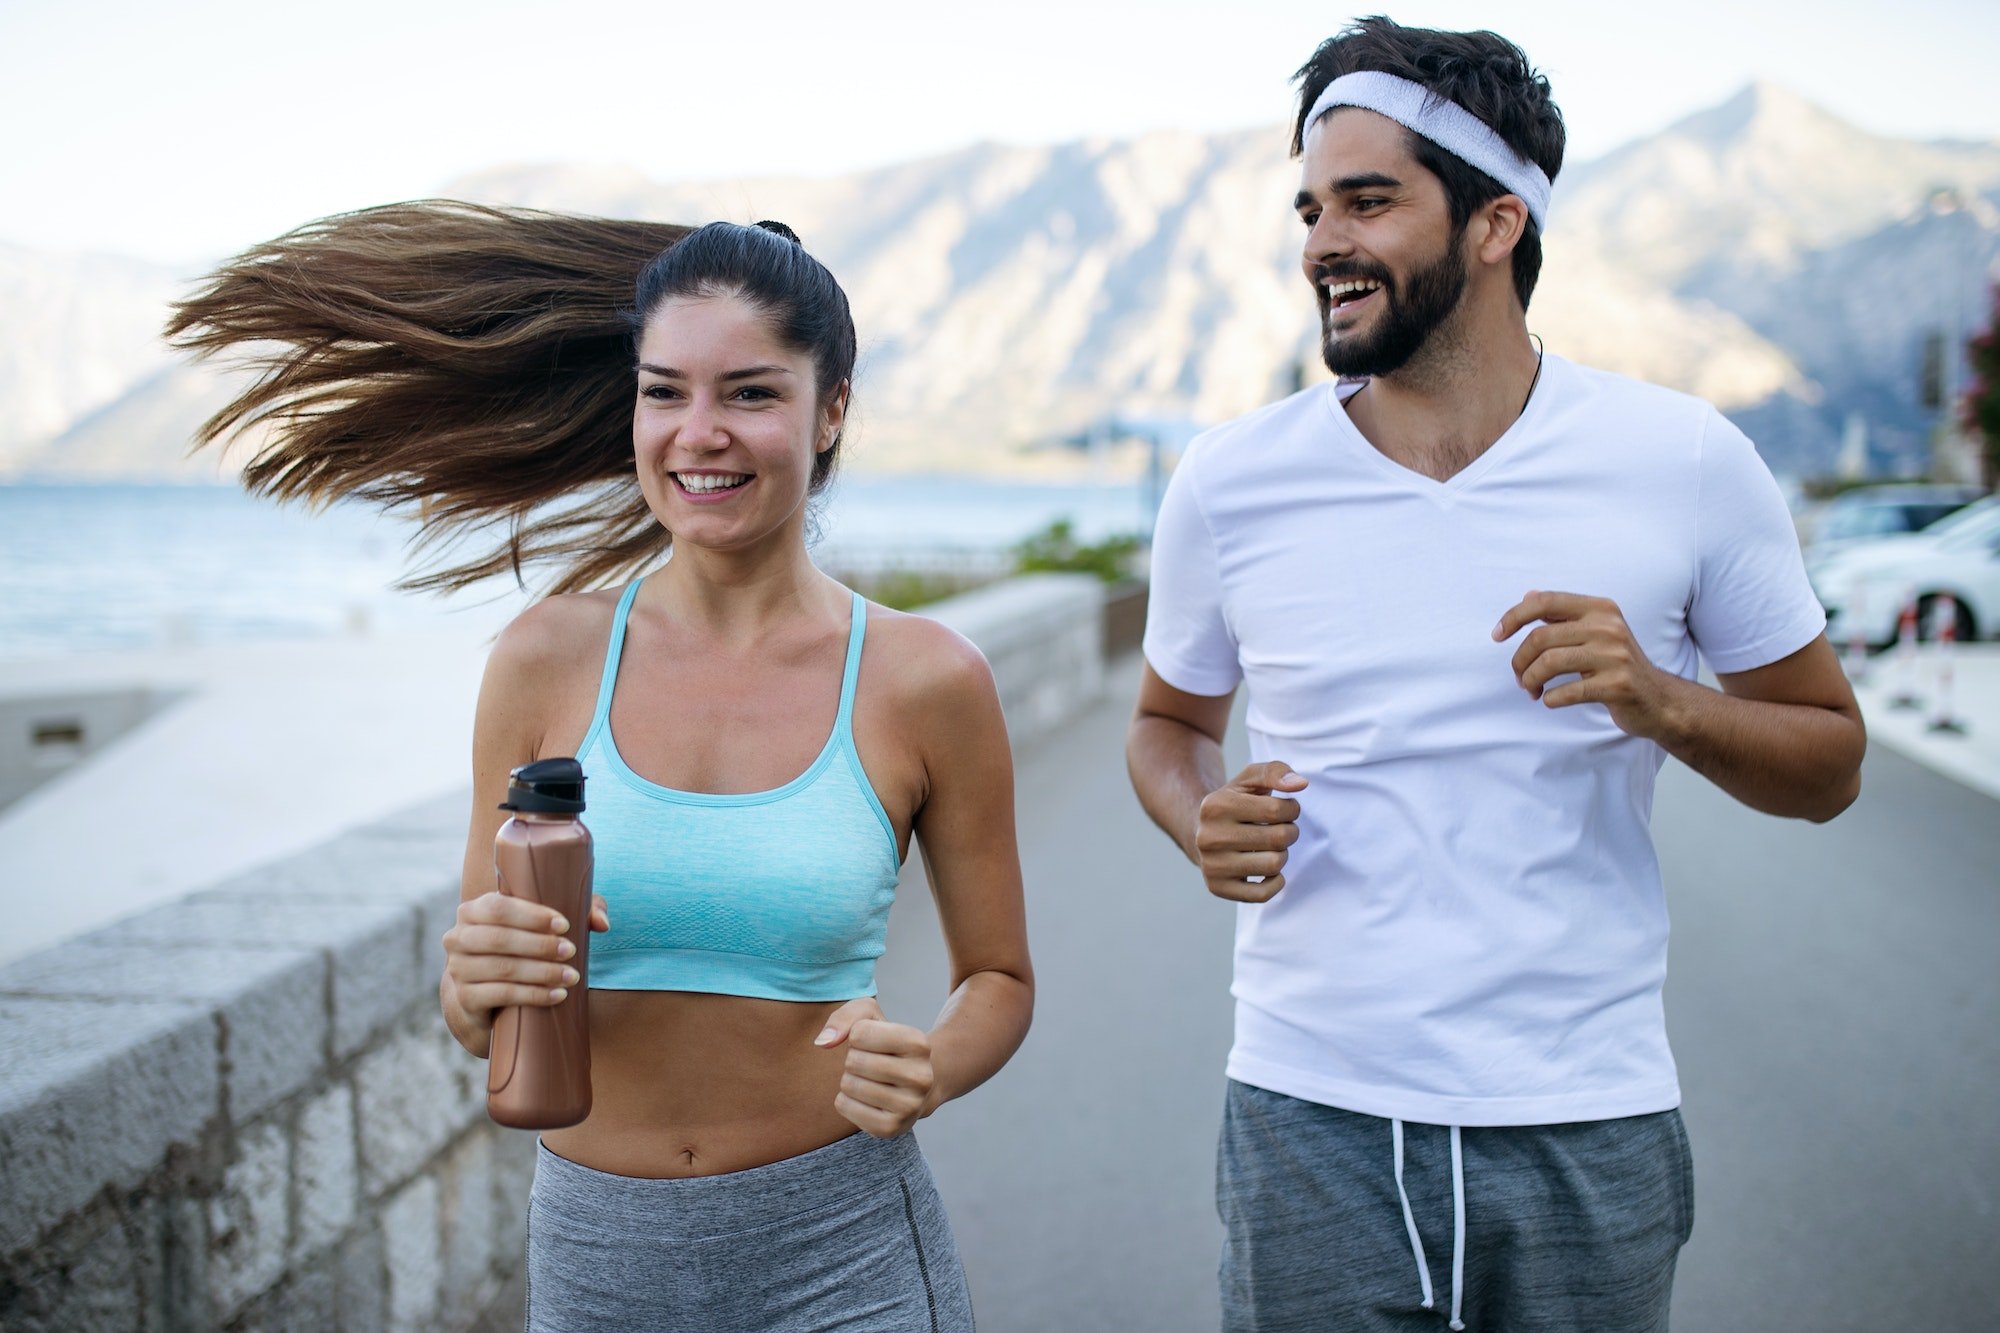 Happy young fit people couple running outdoor